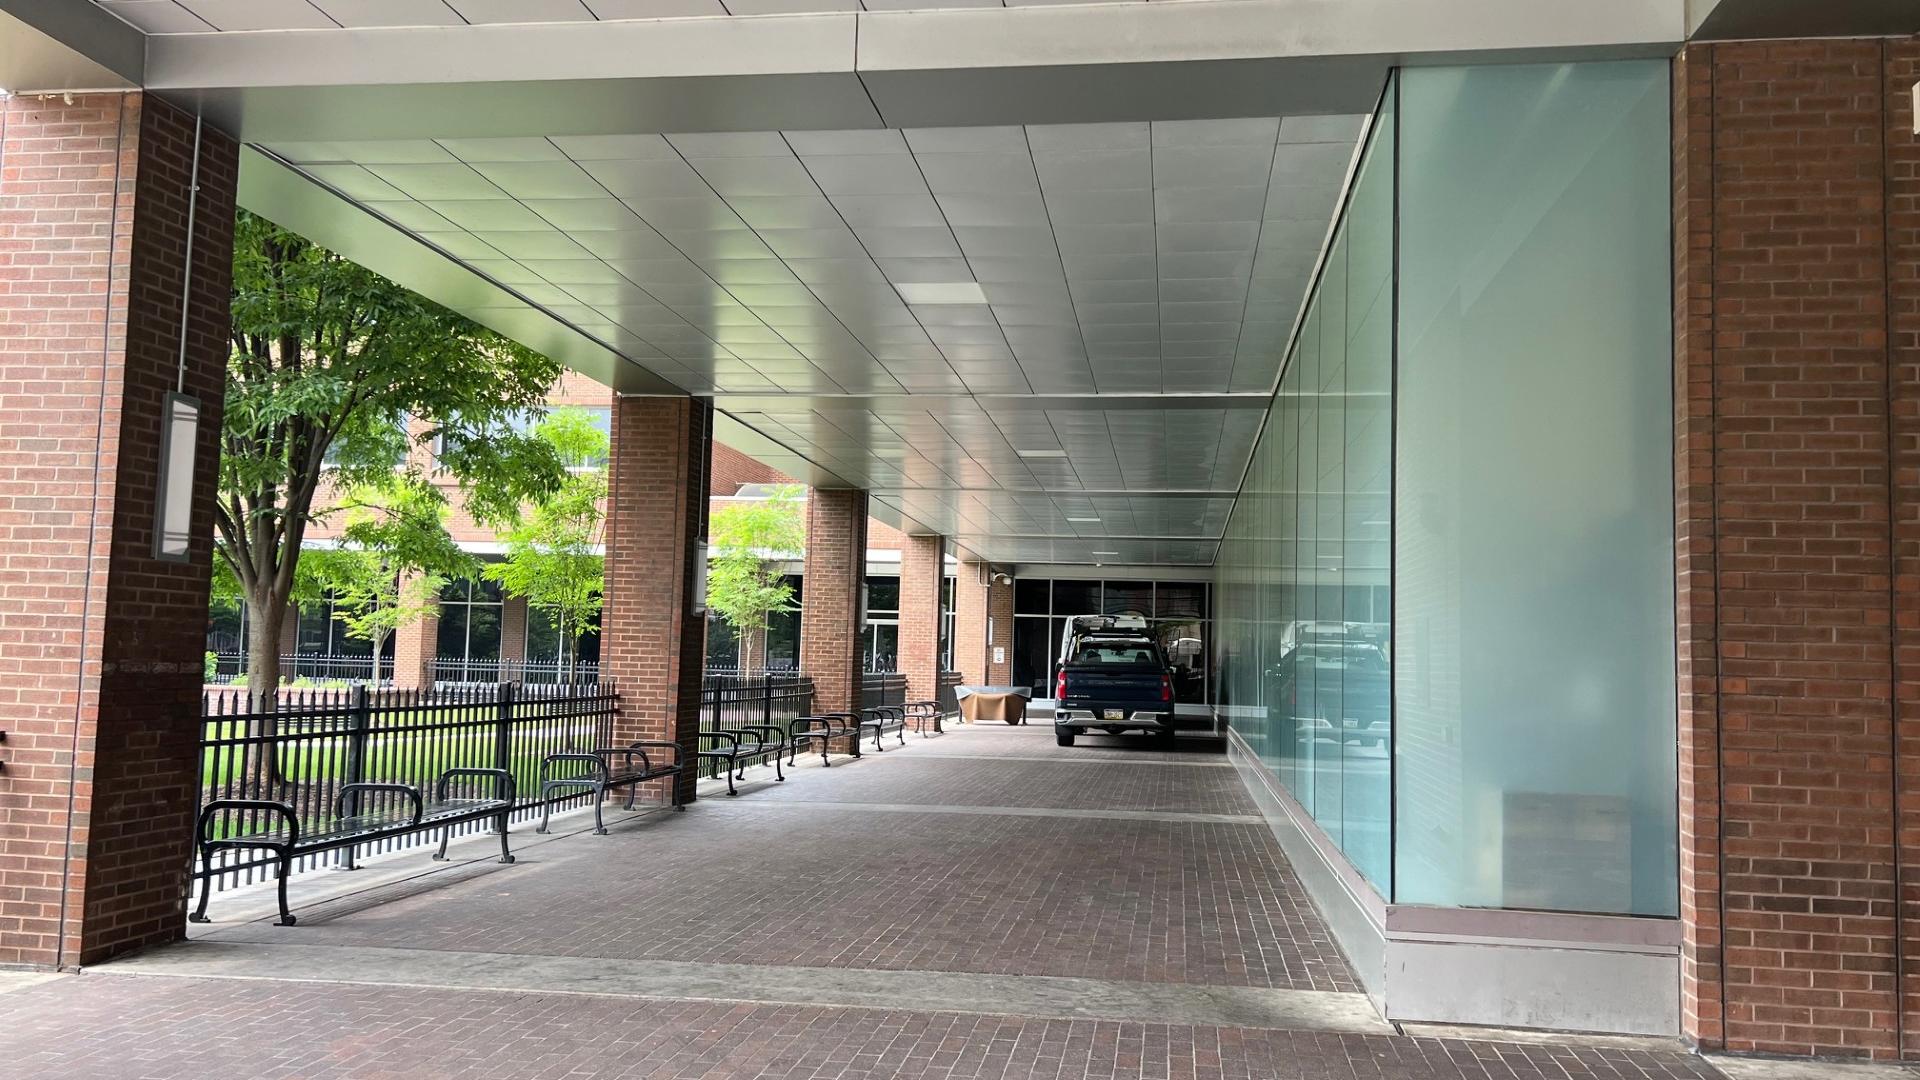 Lancaster County has installed fencing and new window treatments at its government center downtown.